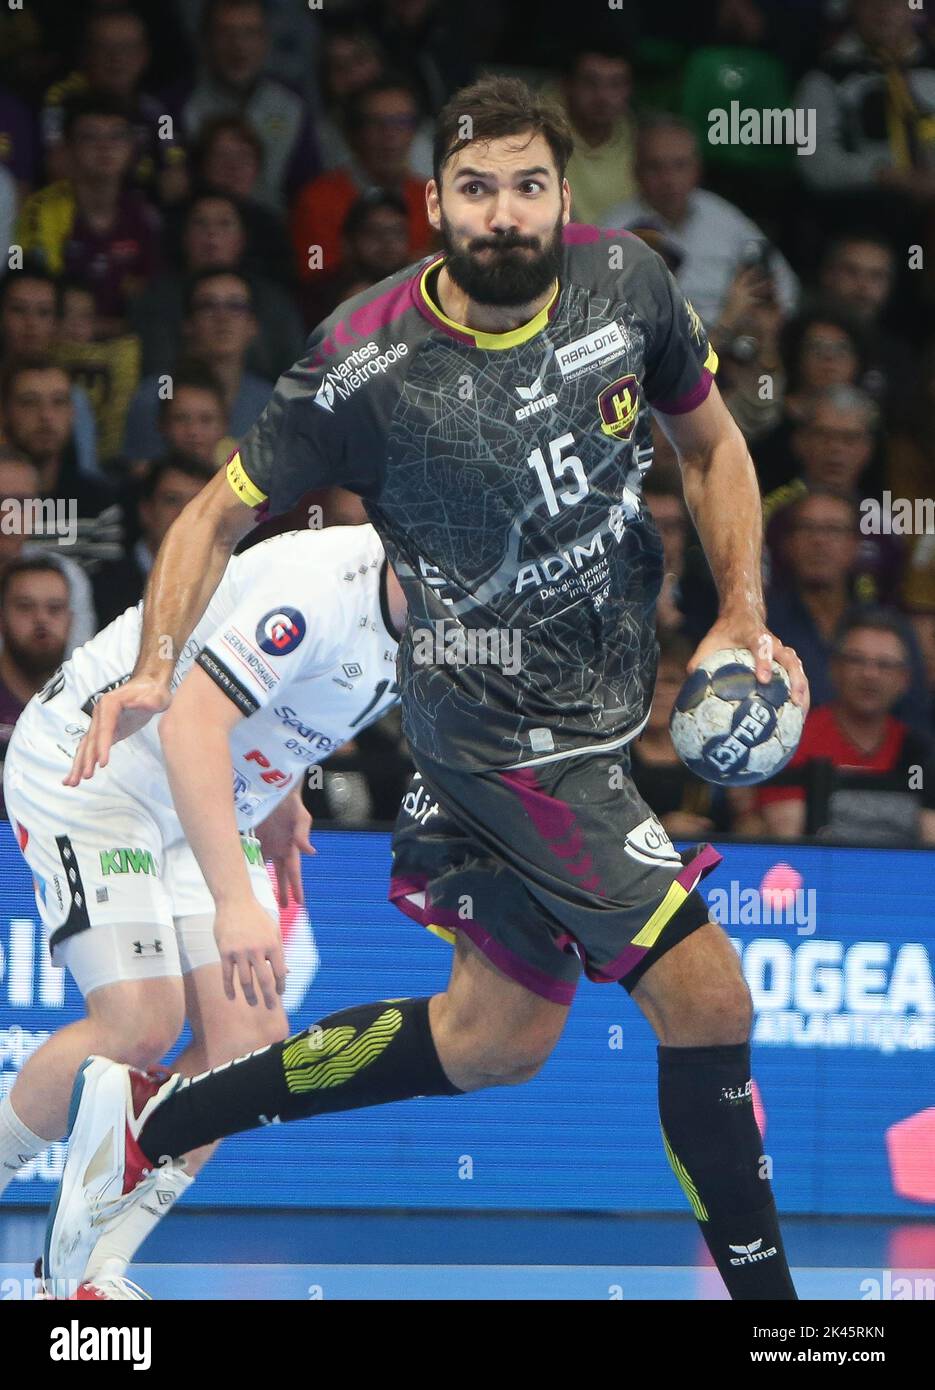 Jorge Maquera Peno of HBC Nantes during the EHF Champions League Handball match between HBC Nantes and Elverum Handball on September 29, 2022 at H Arena in Nantes, France - Photo Laurent Lairys / PANORAMIC Stock Photo